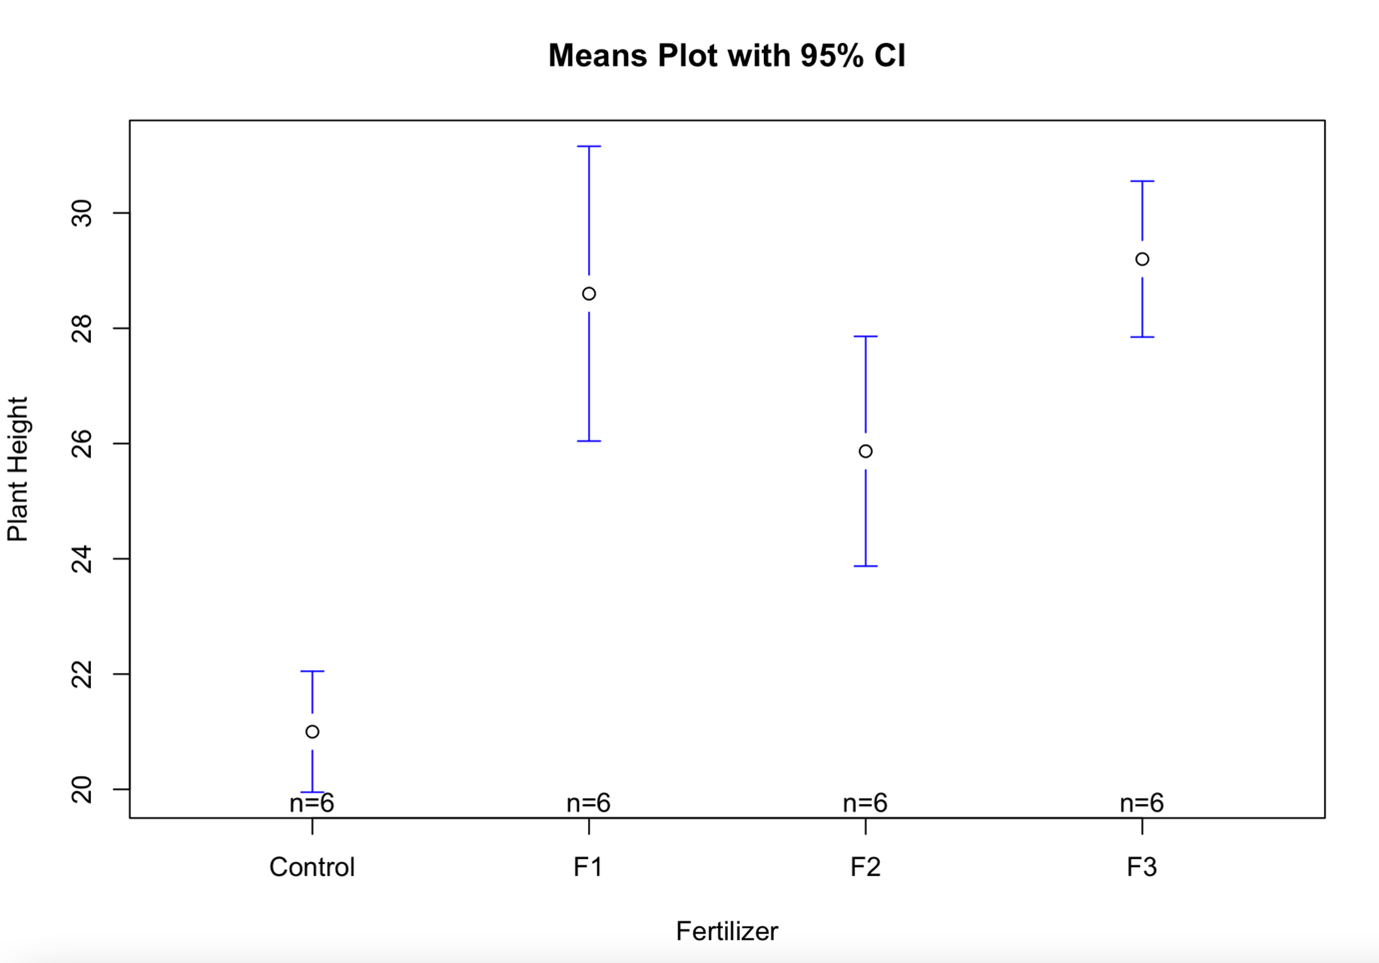 R-generated means plot with 95% confidence intervals, for plant height vs fertilizer.